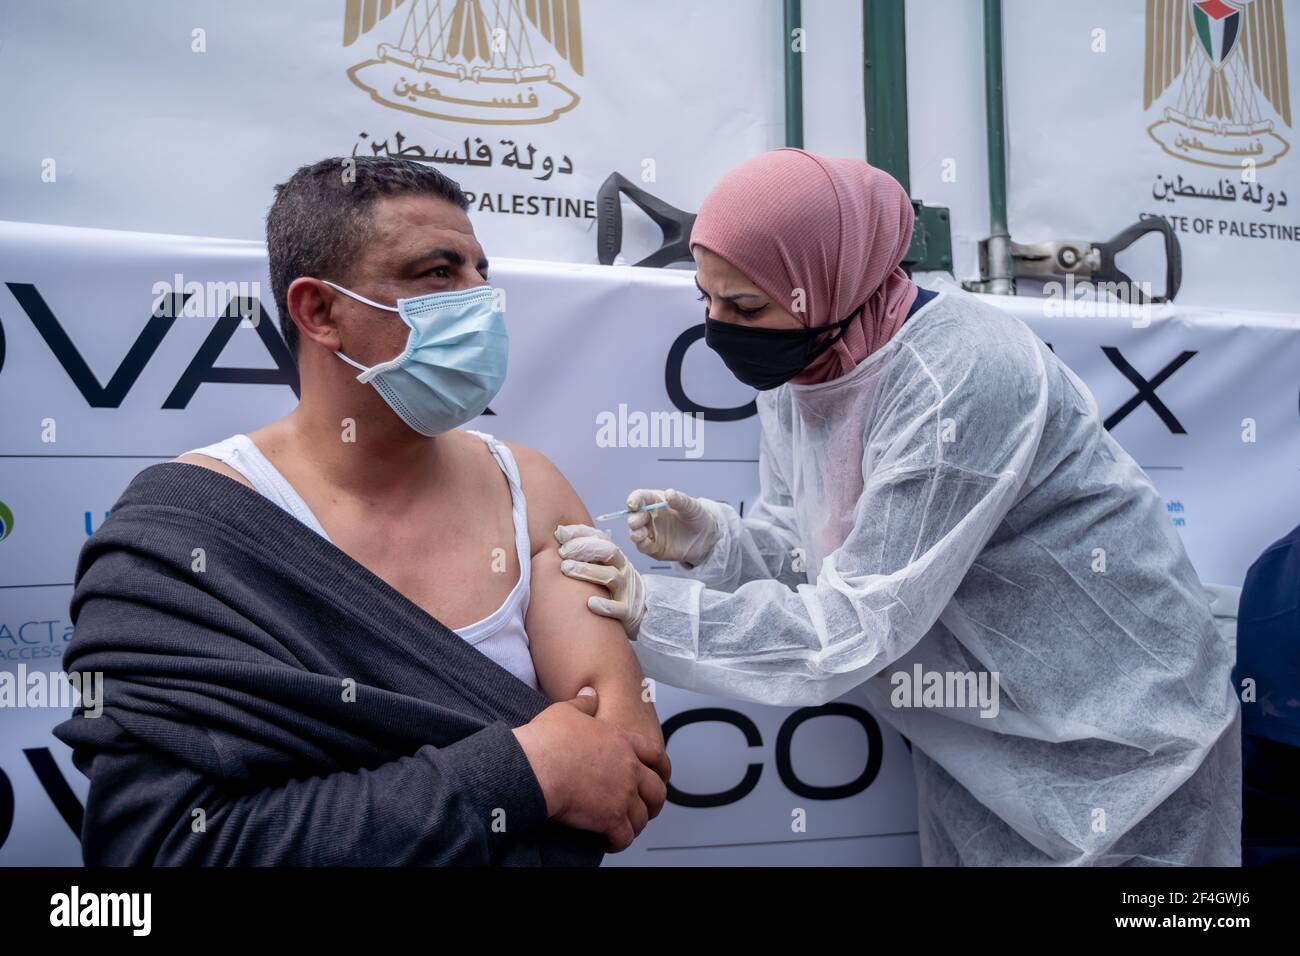 Ramallah. 21st Mar, 2021. A man receives the COVID-19 vaccine during a vaccination campaign in the West Bank city of Ramallah, on March 21, 2021. Palestine on Sunday launched a mass vaccination rollout campaign against coronavirus in a bid to combat the fast-spreading virus across the West Bank and the Gaza Strip. Credit: Luay Sababa/Xinhua/Alamy Live News Stock Photo